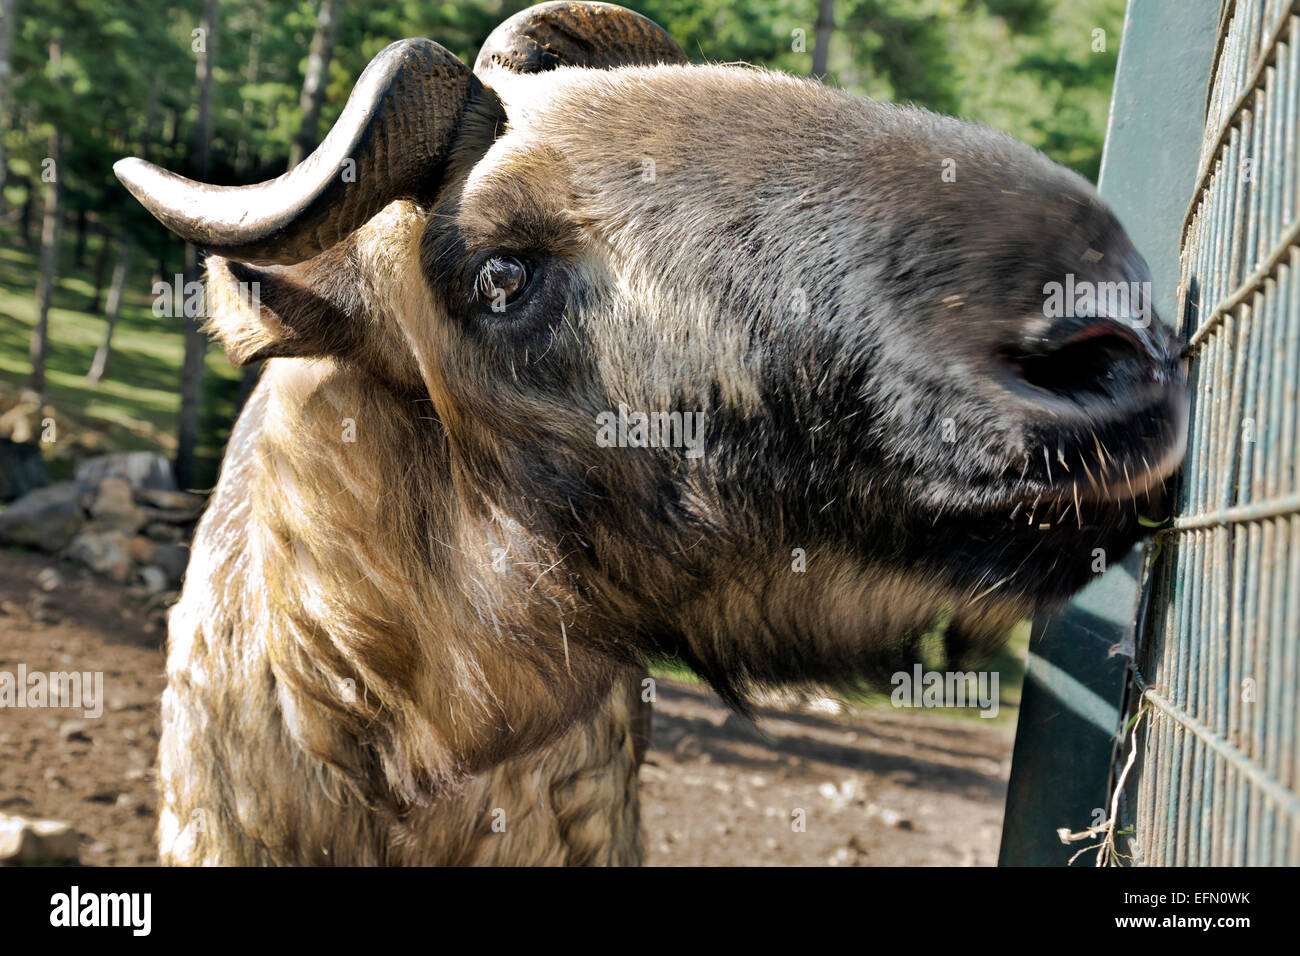 BHUTAN  - A Dong Gyem Tse (takin), national animal of Bhutan eating leaves and grass offered by tourists through the fence. Stock Photo